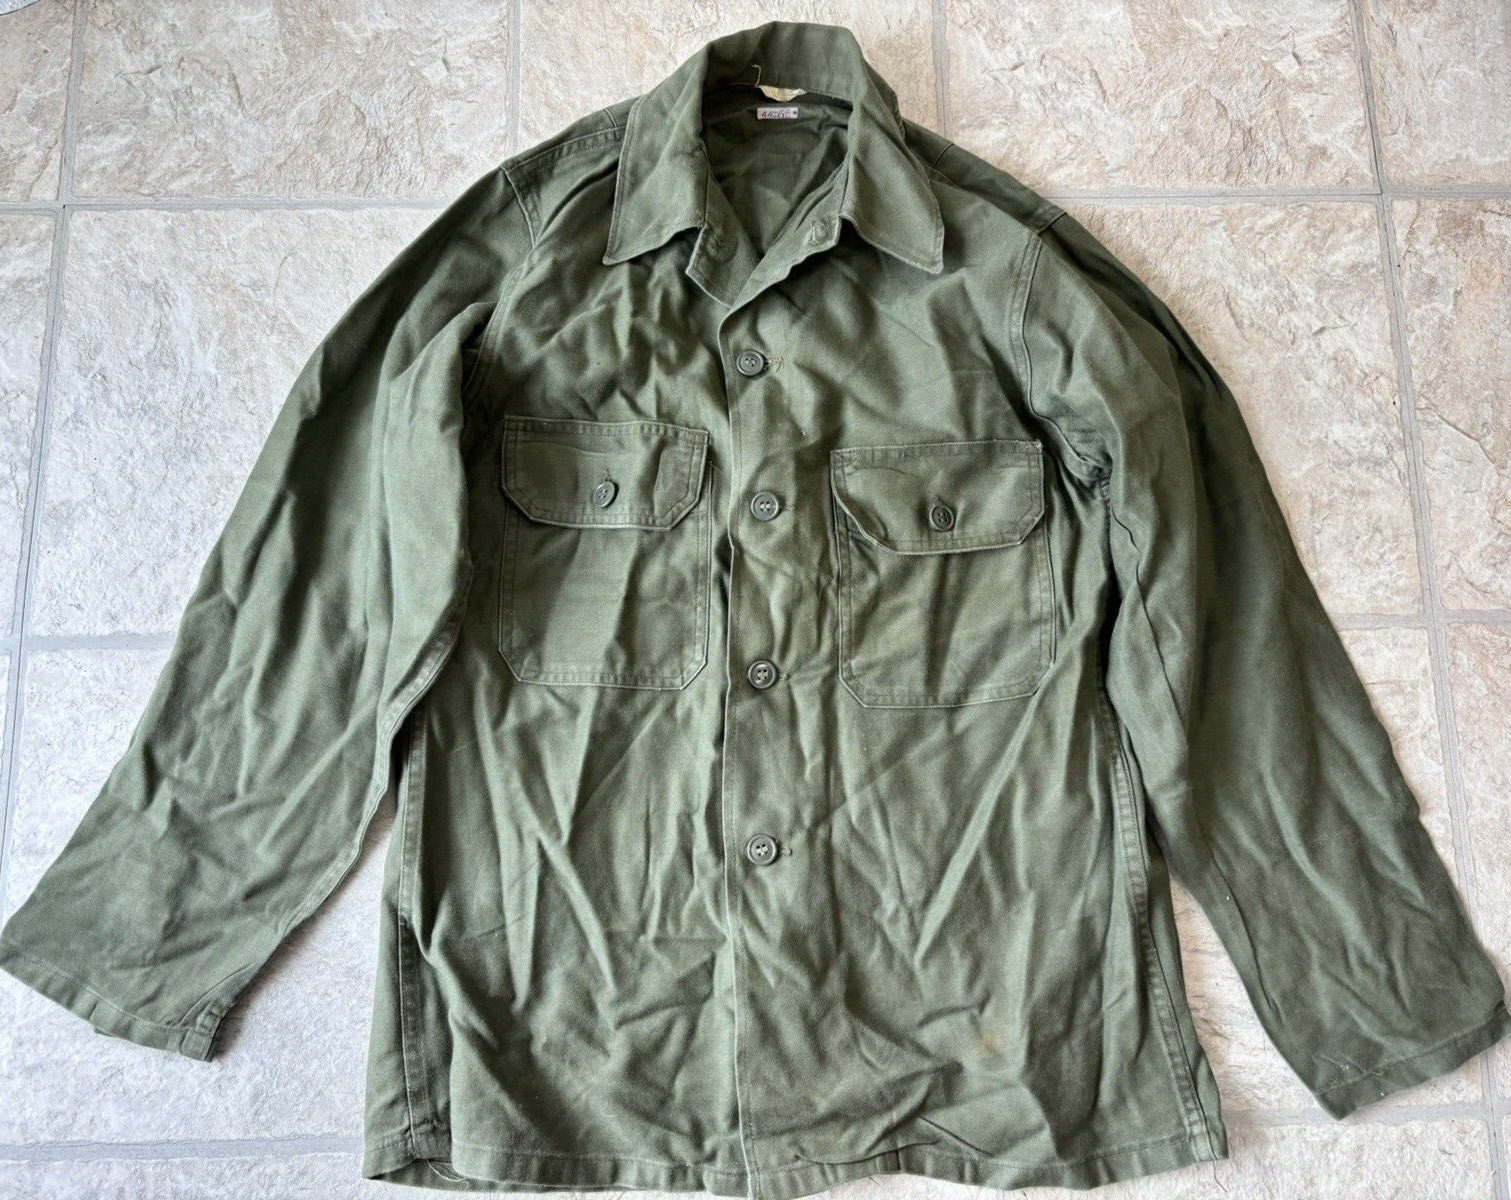 US Marine Corps OD Green Cotton Fatigue Jacket Size 14 & 1/2 X 32 with EGA Stamp